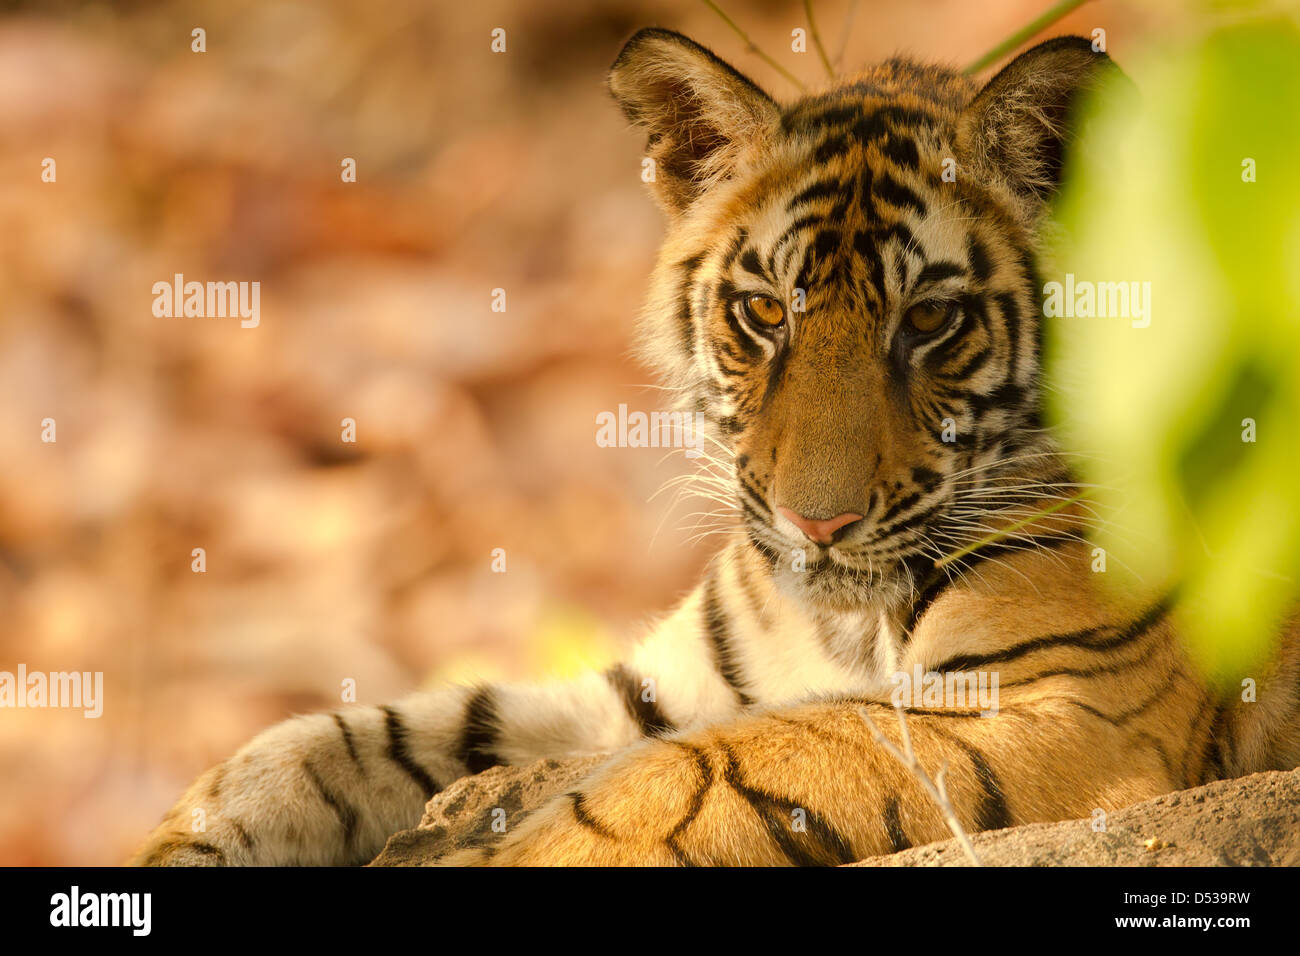 A tiger cub sitting with the sun shining on half its face Stock Photo